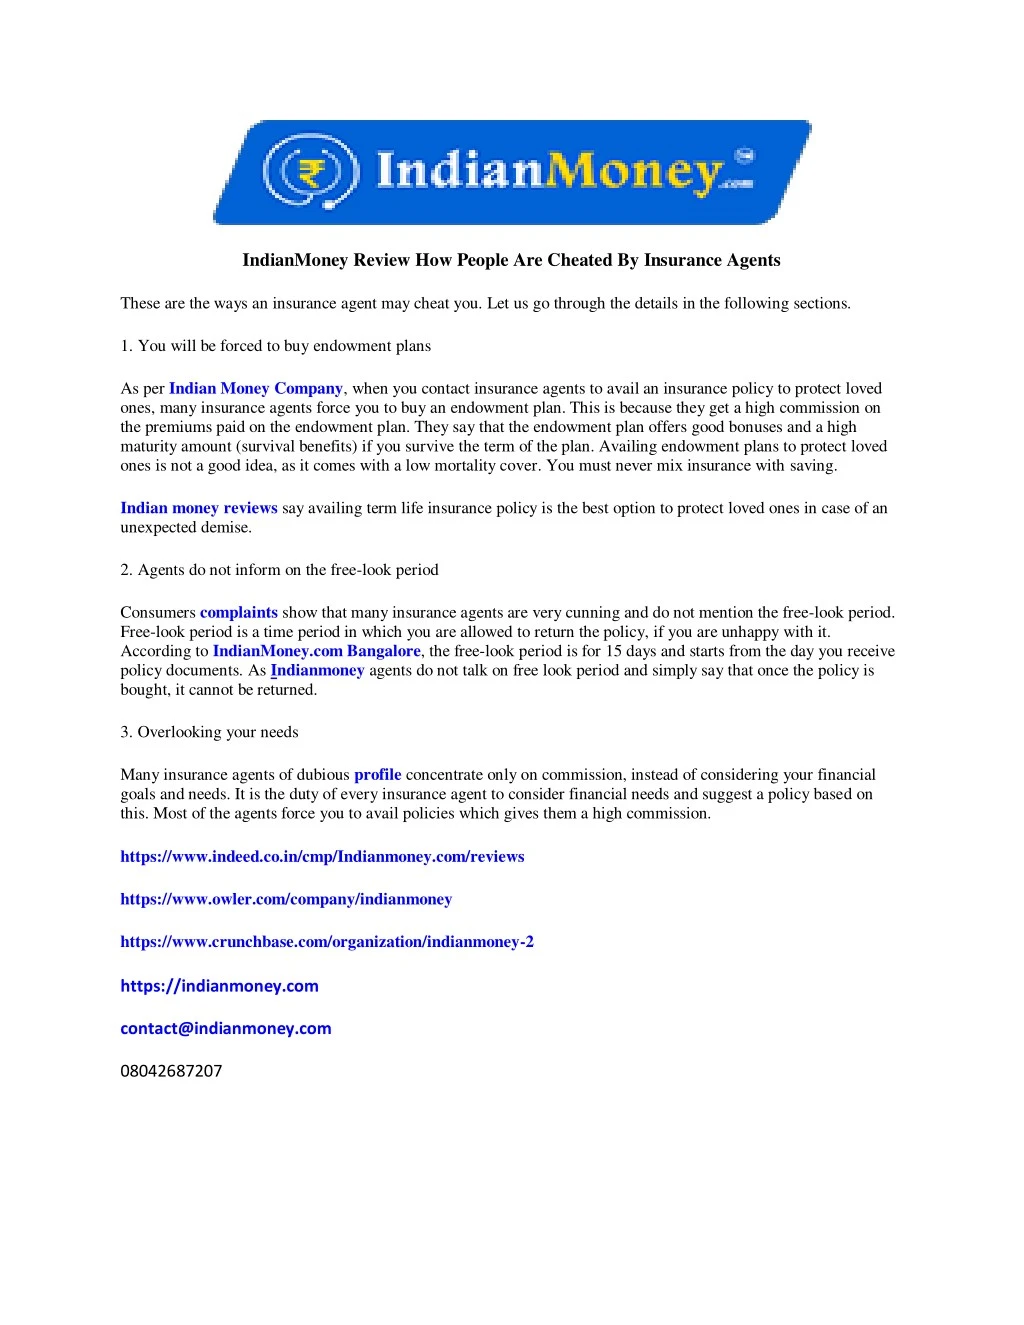 indianmoney review how people are cheated